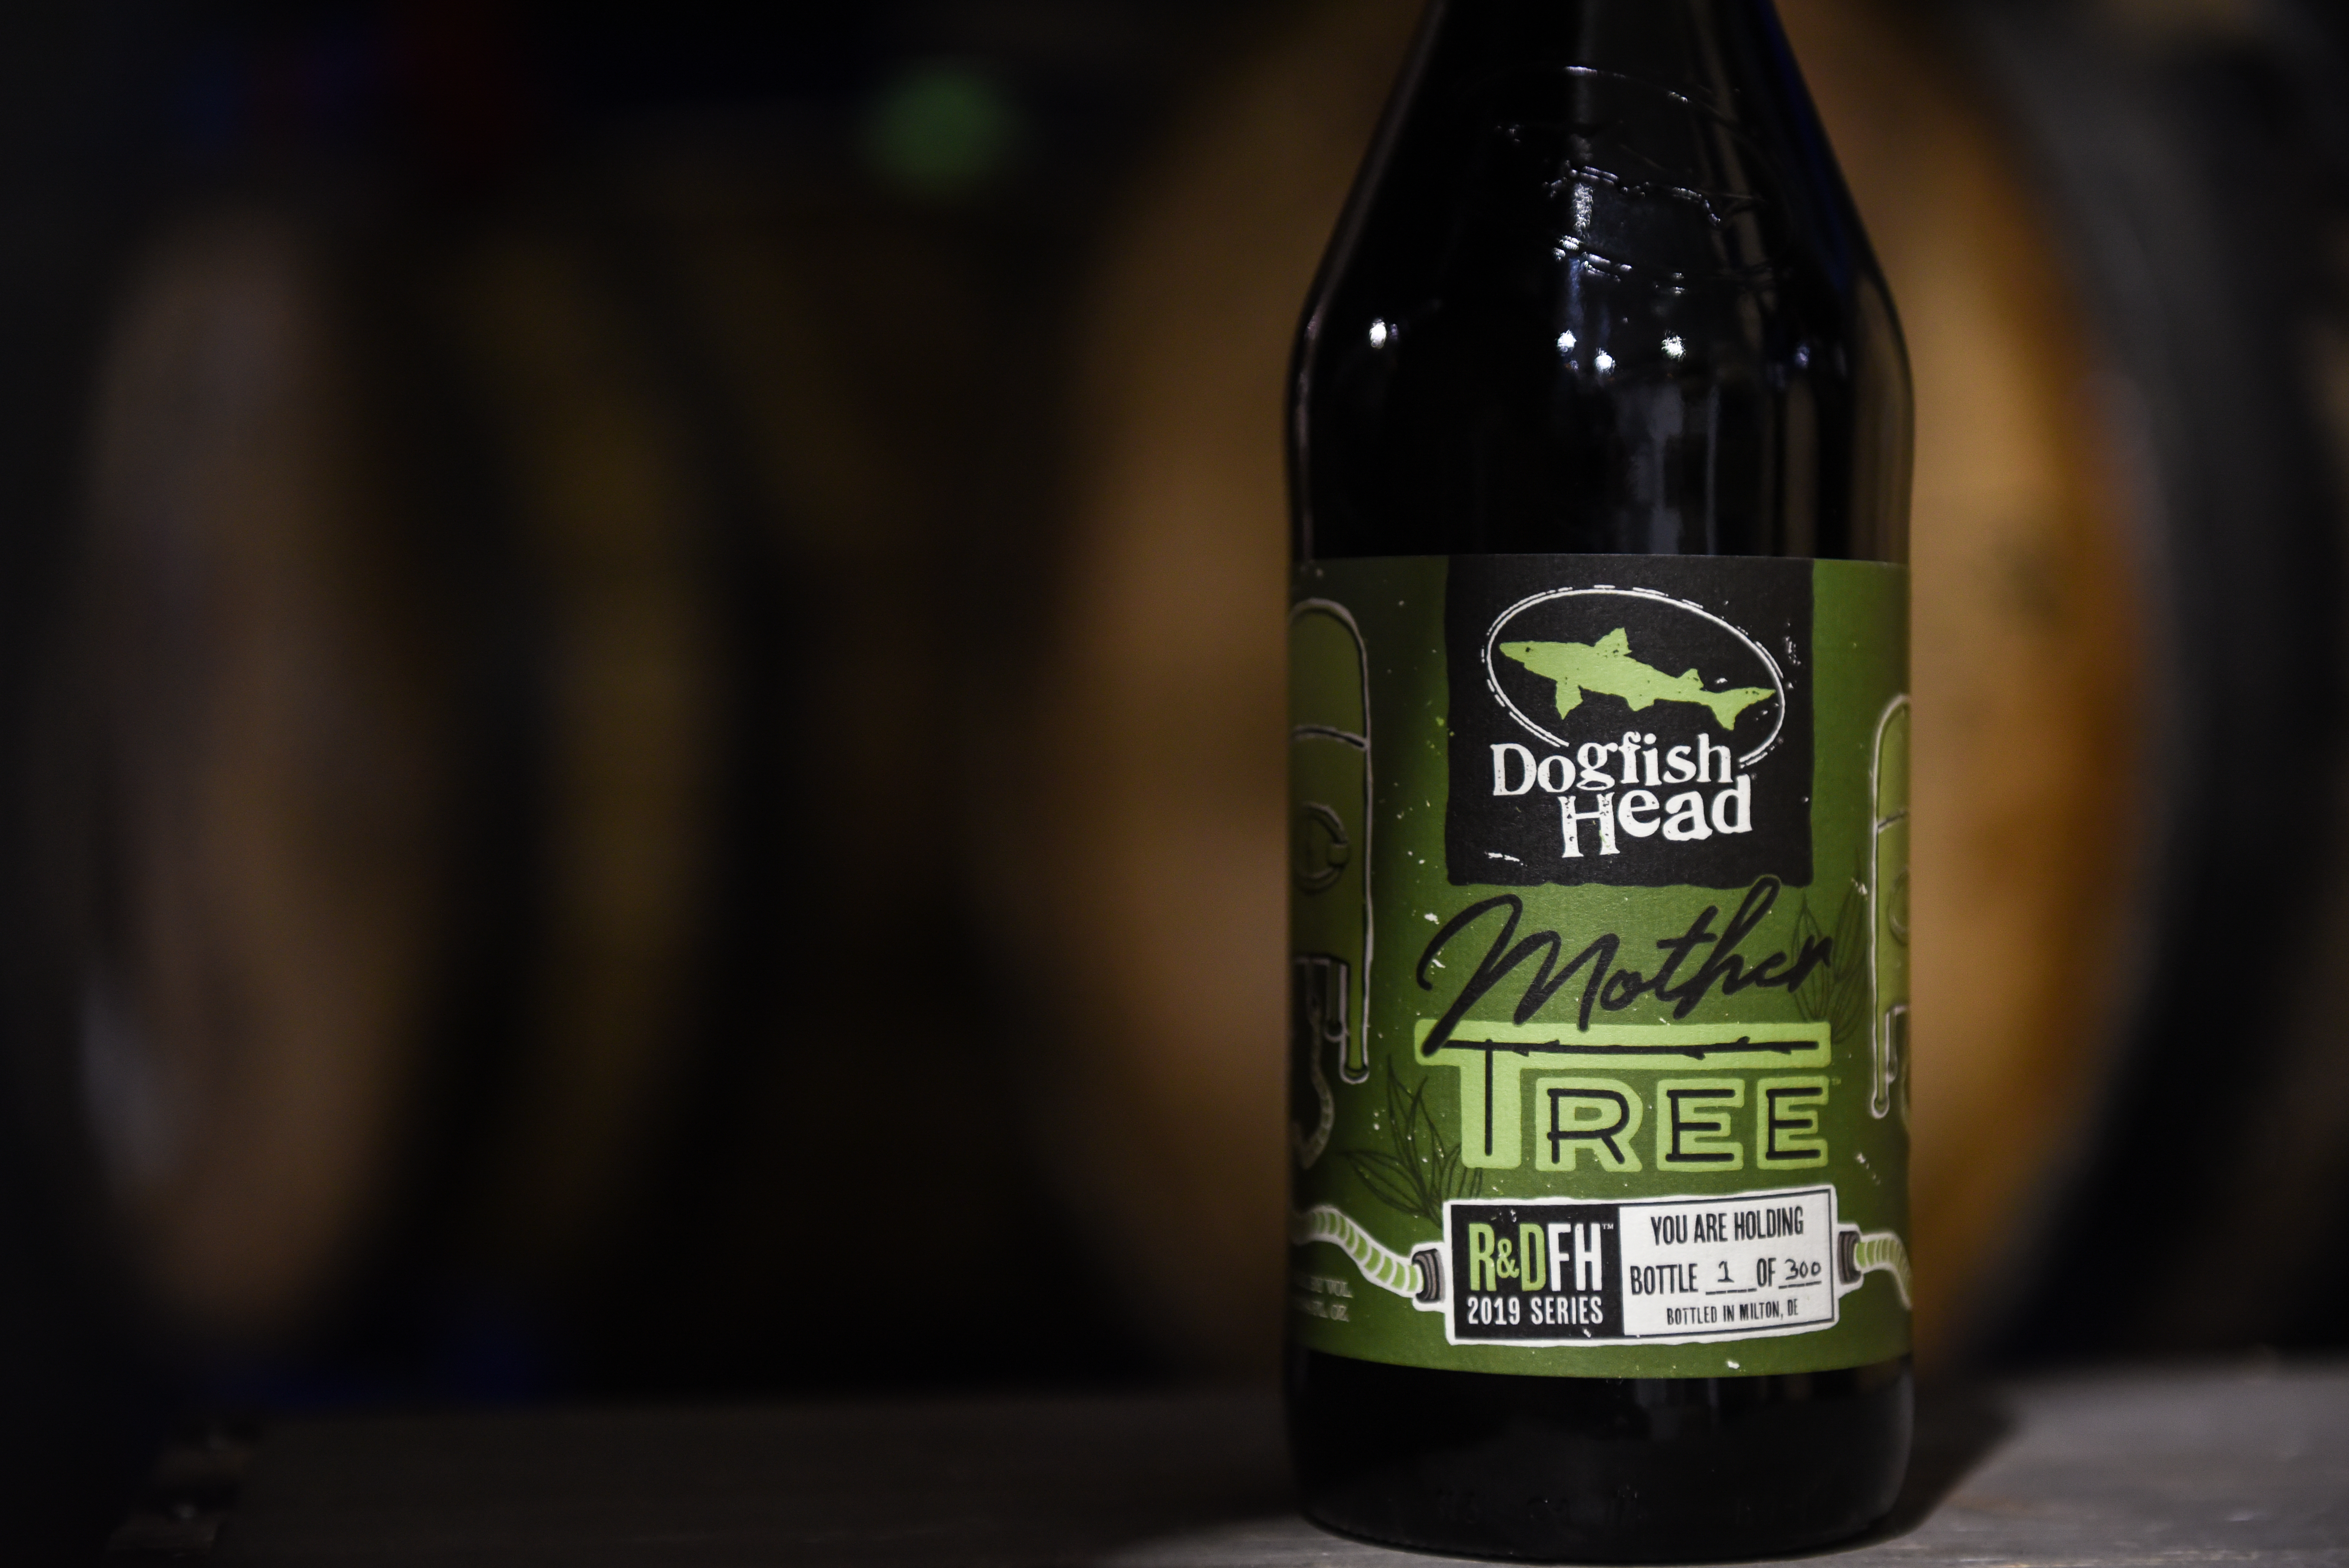 Dogfish Head Releasing 2019 Mother Tree 1/19